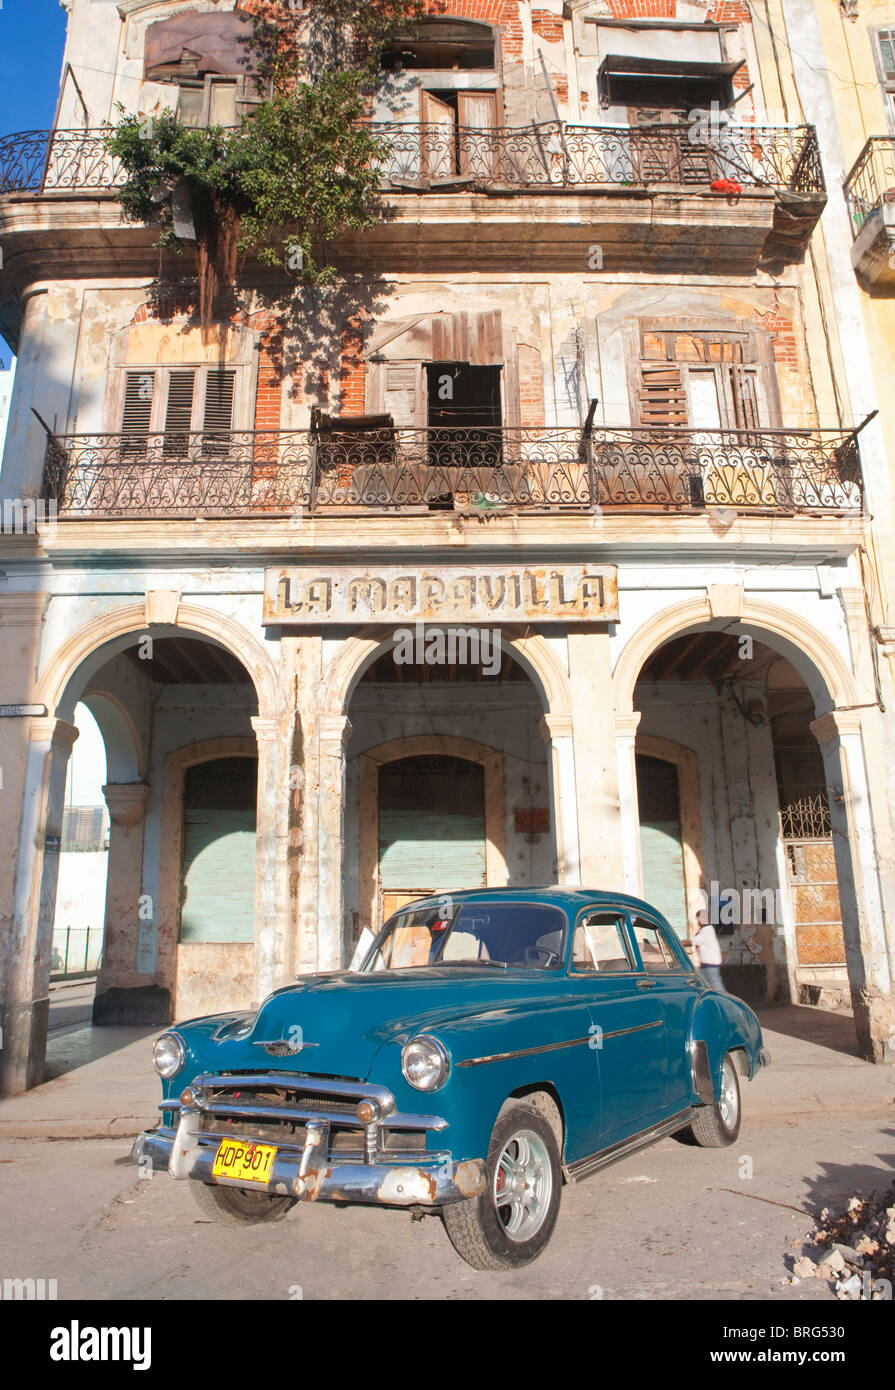 HABANA VIEJA: CLASSIC AMERICAN CAR AND COLONIAL BUILDING Stock Photo